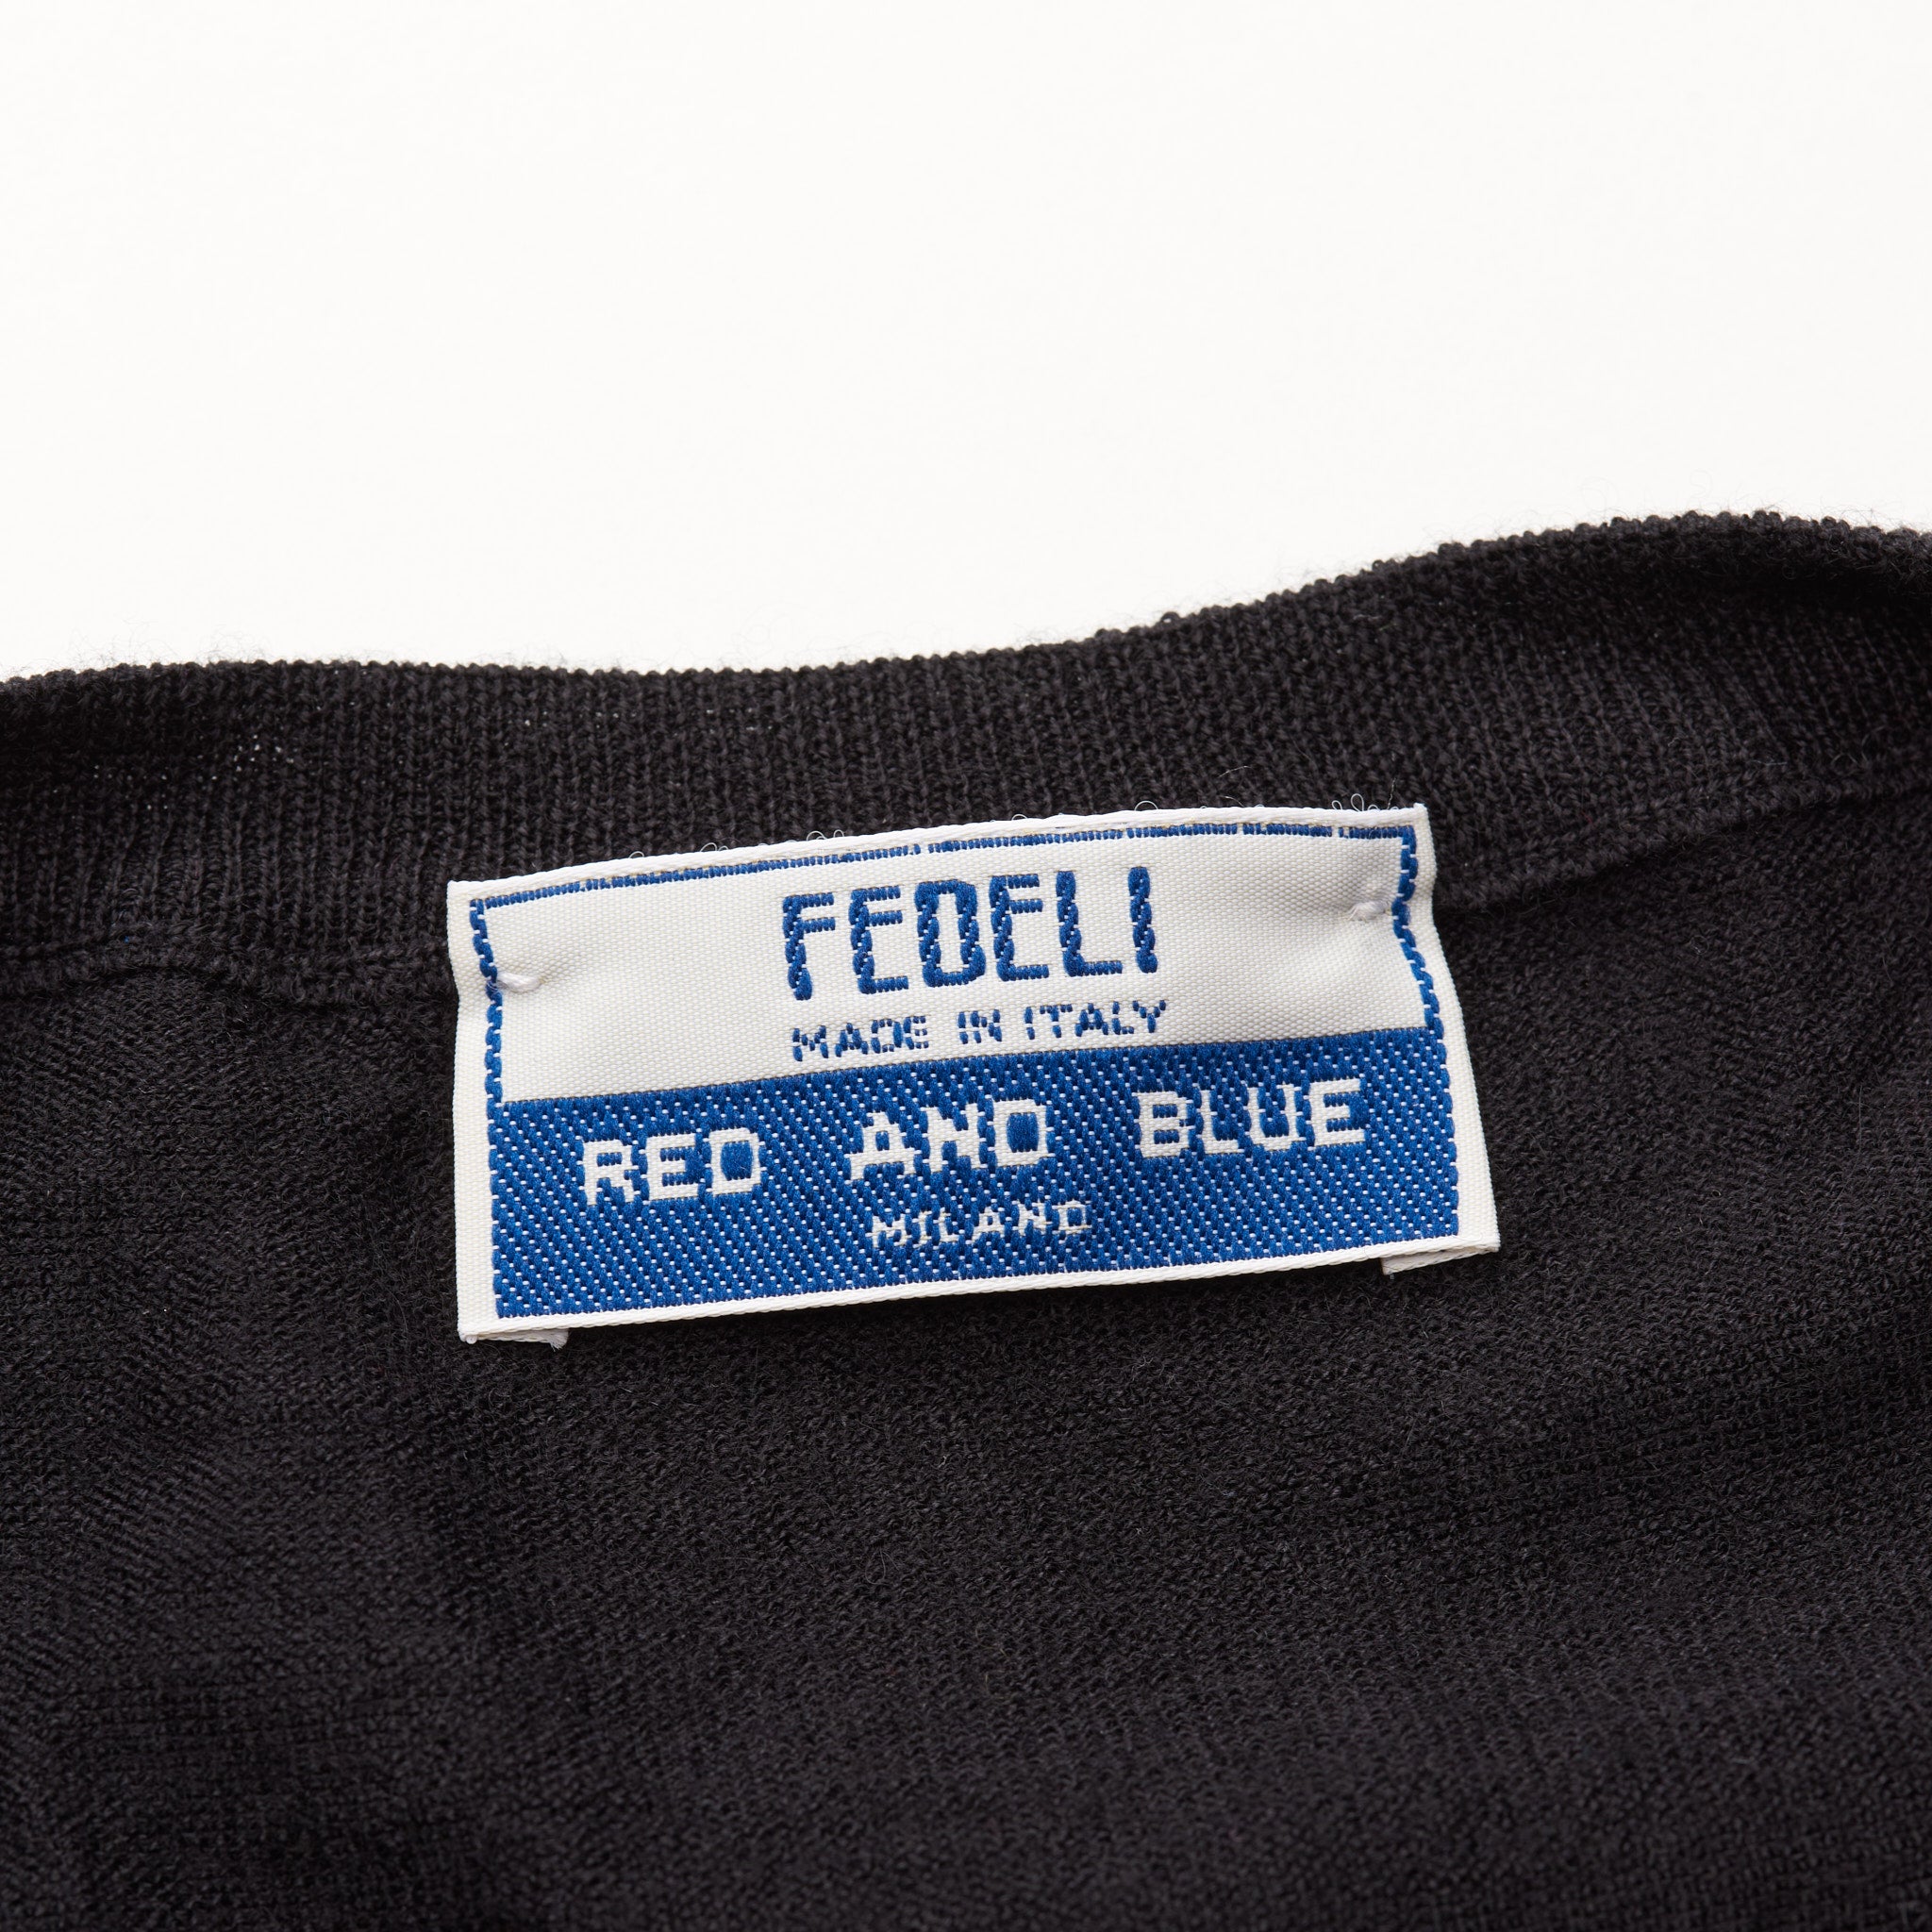 FEDELI "Red and Blue" Black Cashmere-Silk V-Neck Sleeveless Sweater 54 NEW XL FEDELI